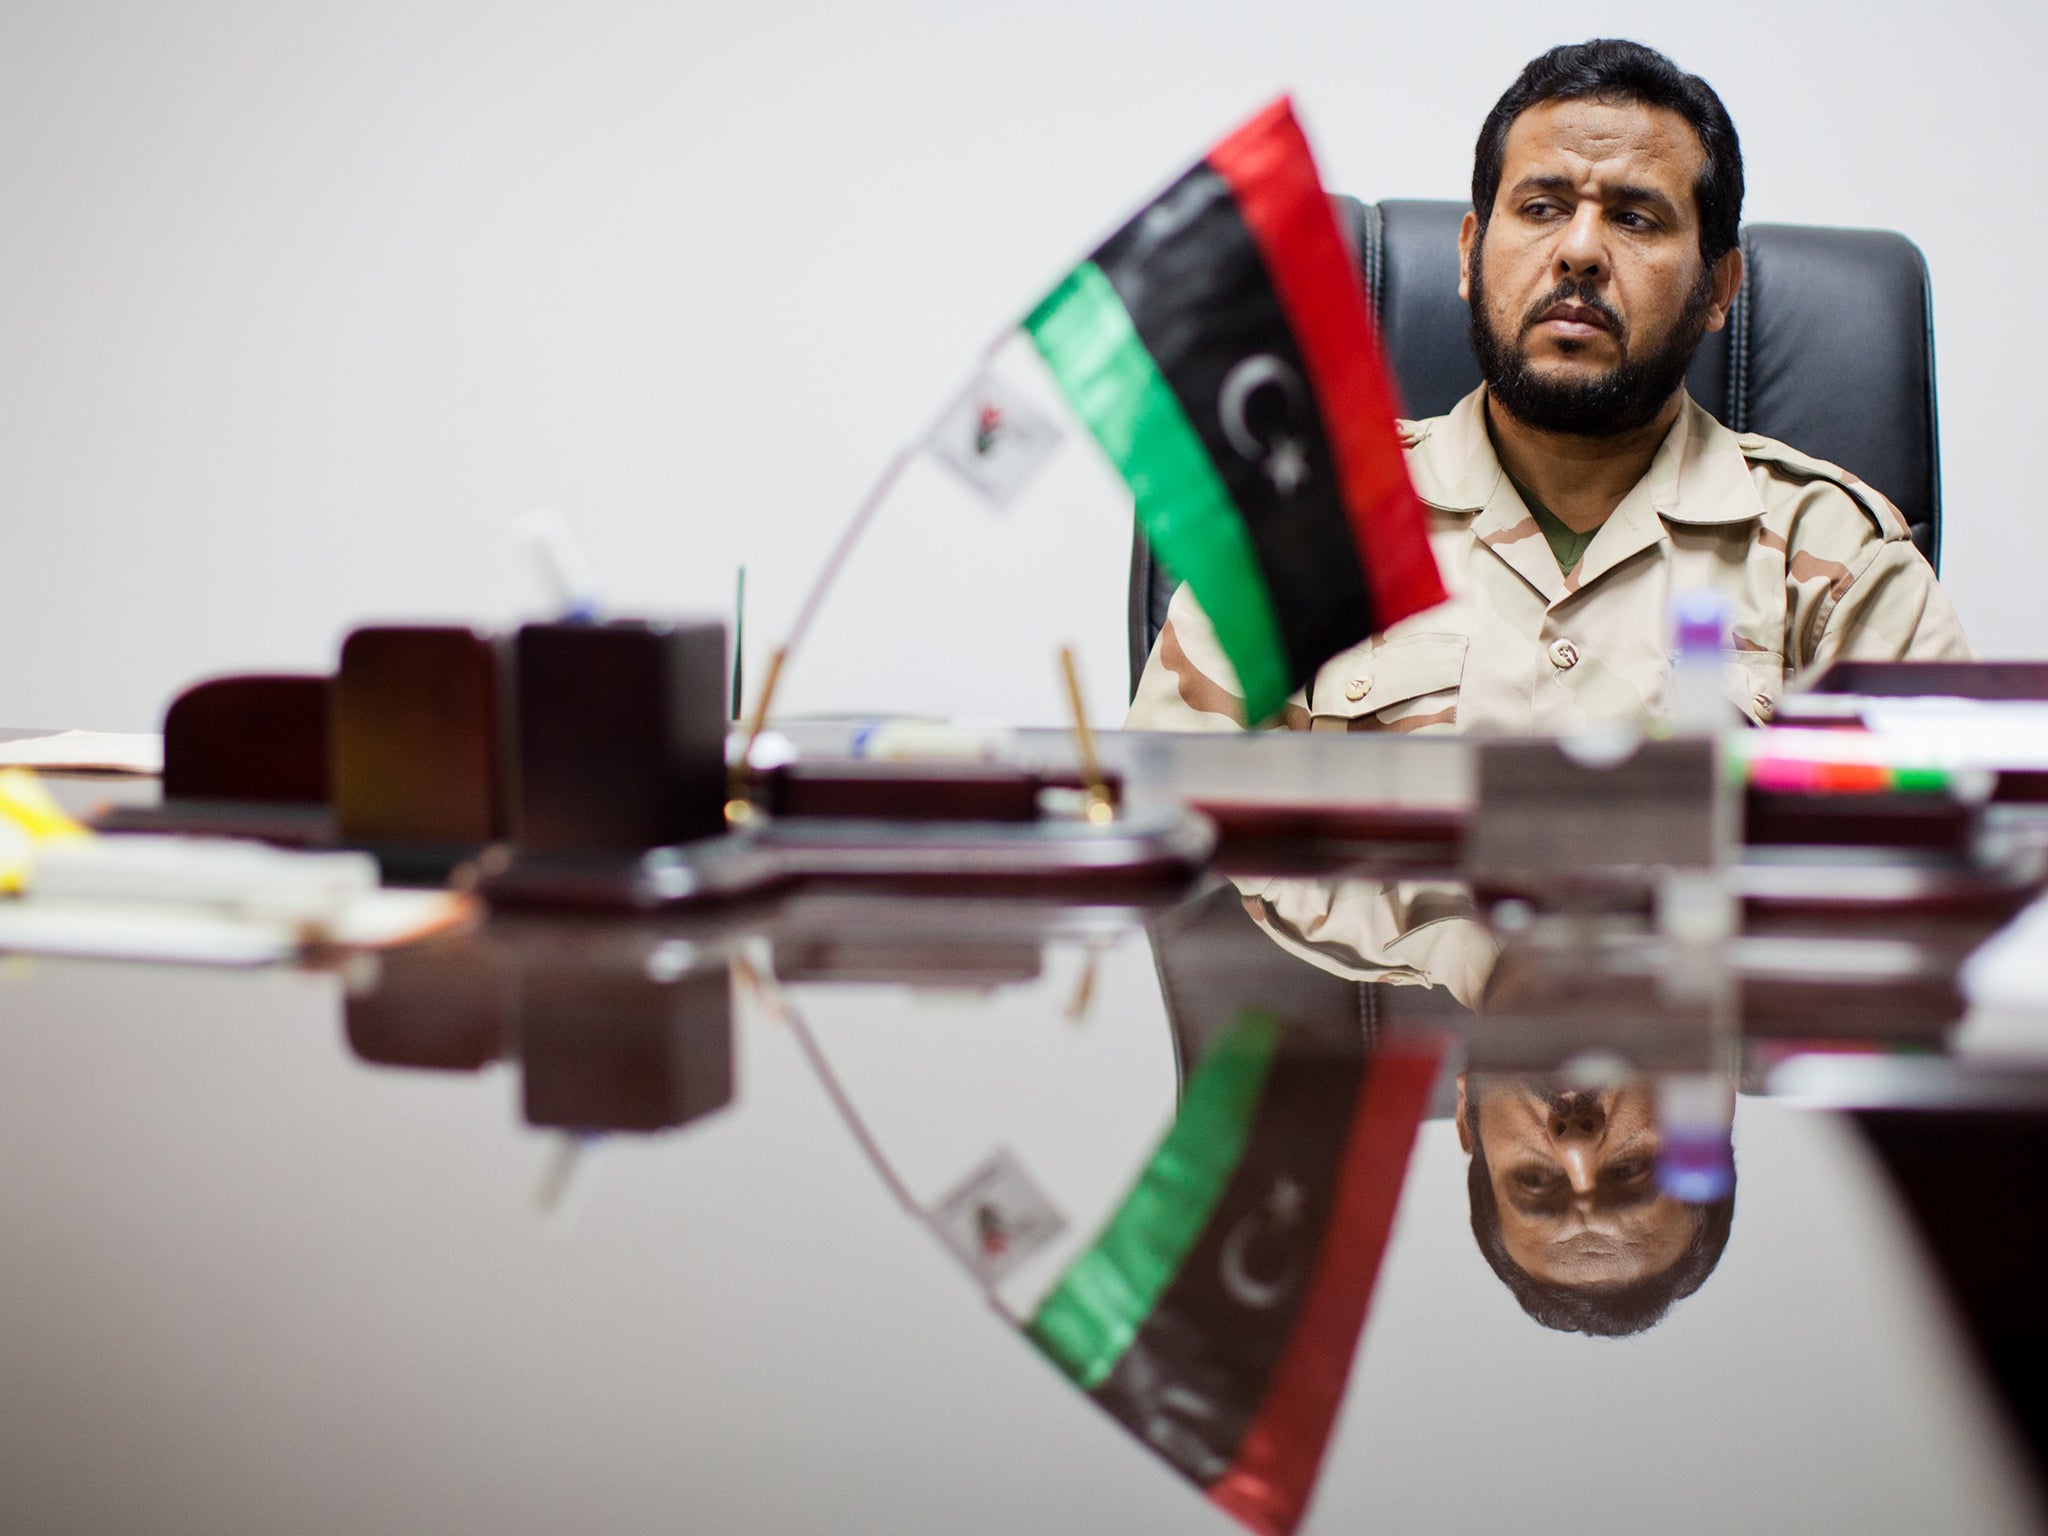 MI6 played a role in kidnapping Abdul Hakim Belhaj and the rendition of him and his pregnant wife to Muammar Gaddafi’s Libya in 2004